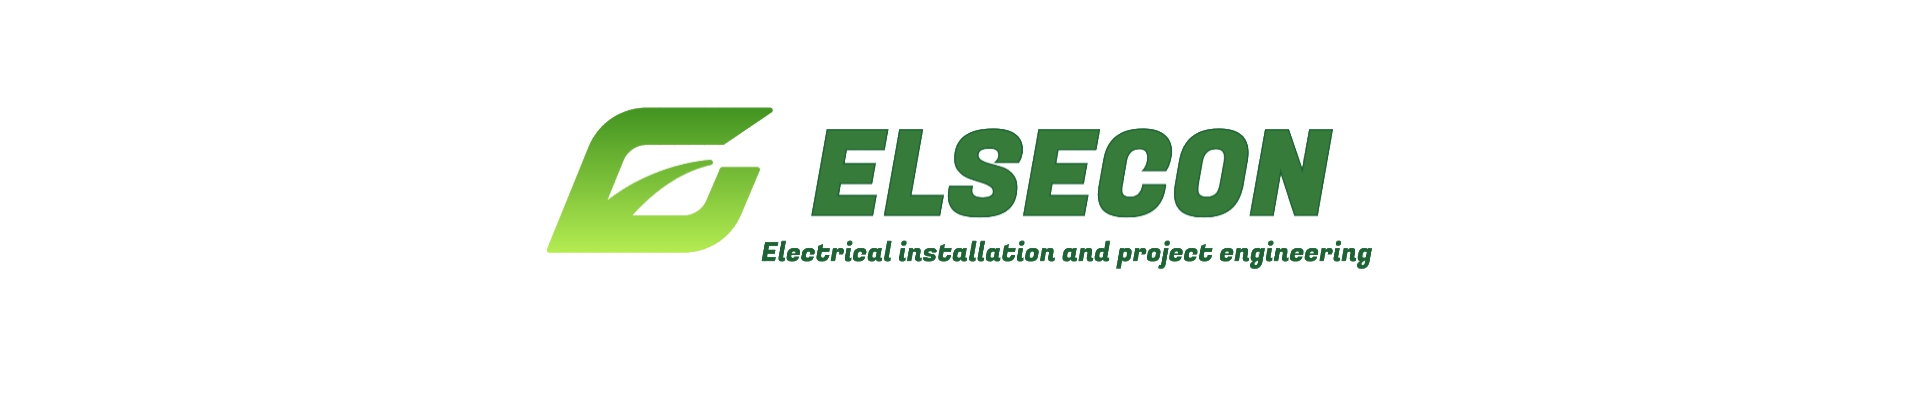 Installation of solar panels, Solutions, renovation, electricity, electrical works, Weak flow works, Automation works, construction of electrical installation, construction of an electrical installation, Ventilation automation